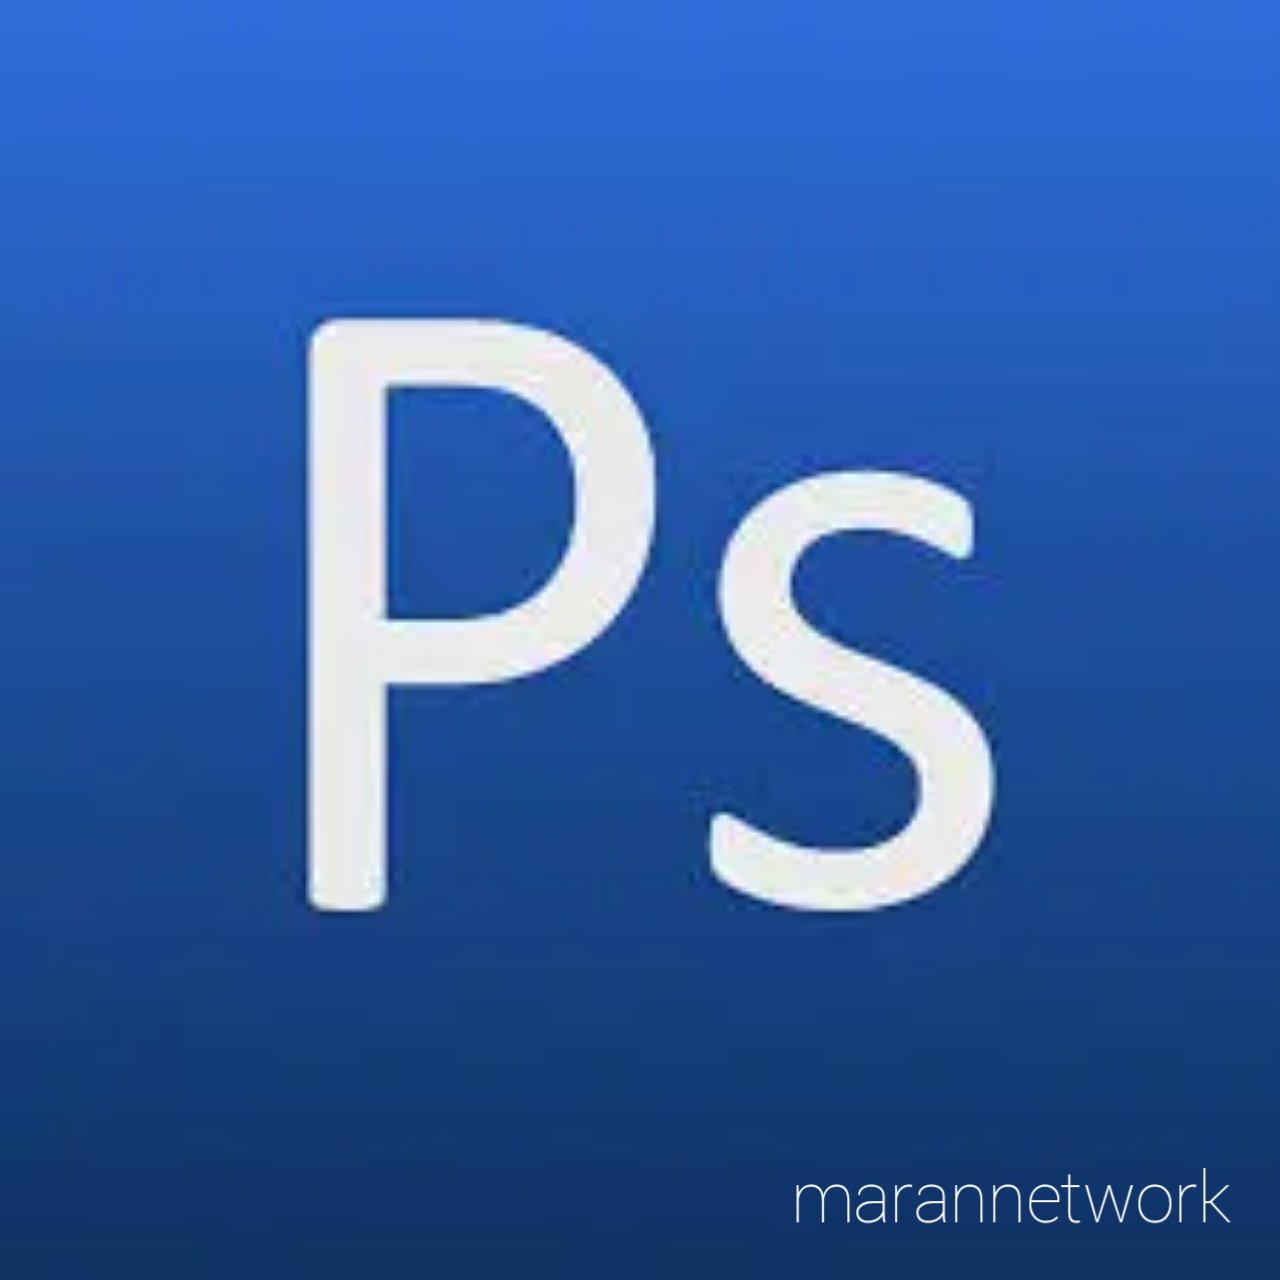 adobe photoshop cs3 free download full version for windows 7 with key